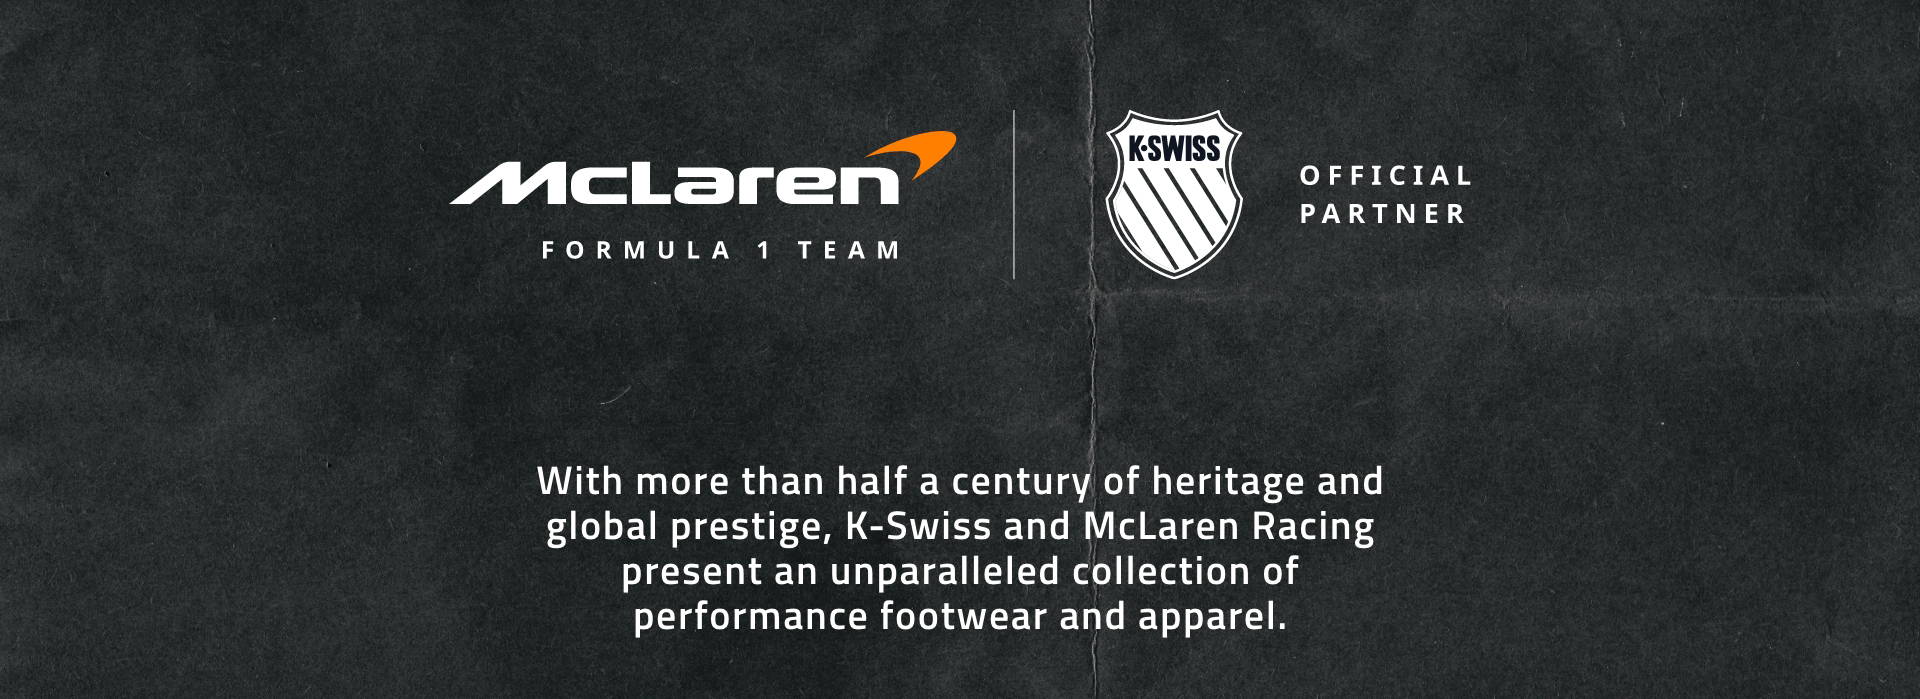 Text: McLaren Formula 1 Team. K-Swiss Official Partner. Text Below: With more than half a century of heritage and global prestige, K-Swiss and McLaren Racing present an unparalleled collection of performance footwear and apparel.